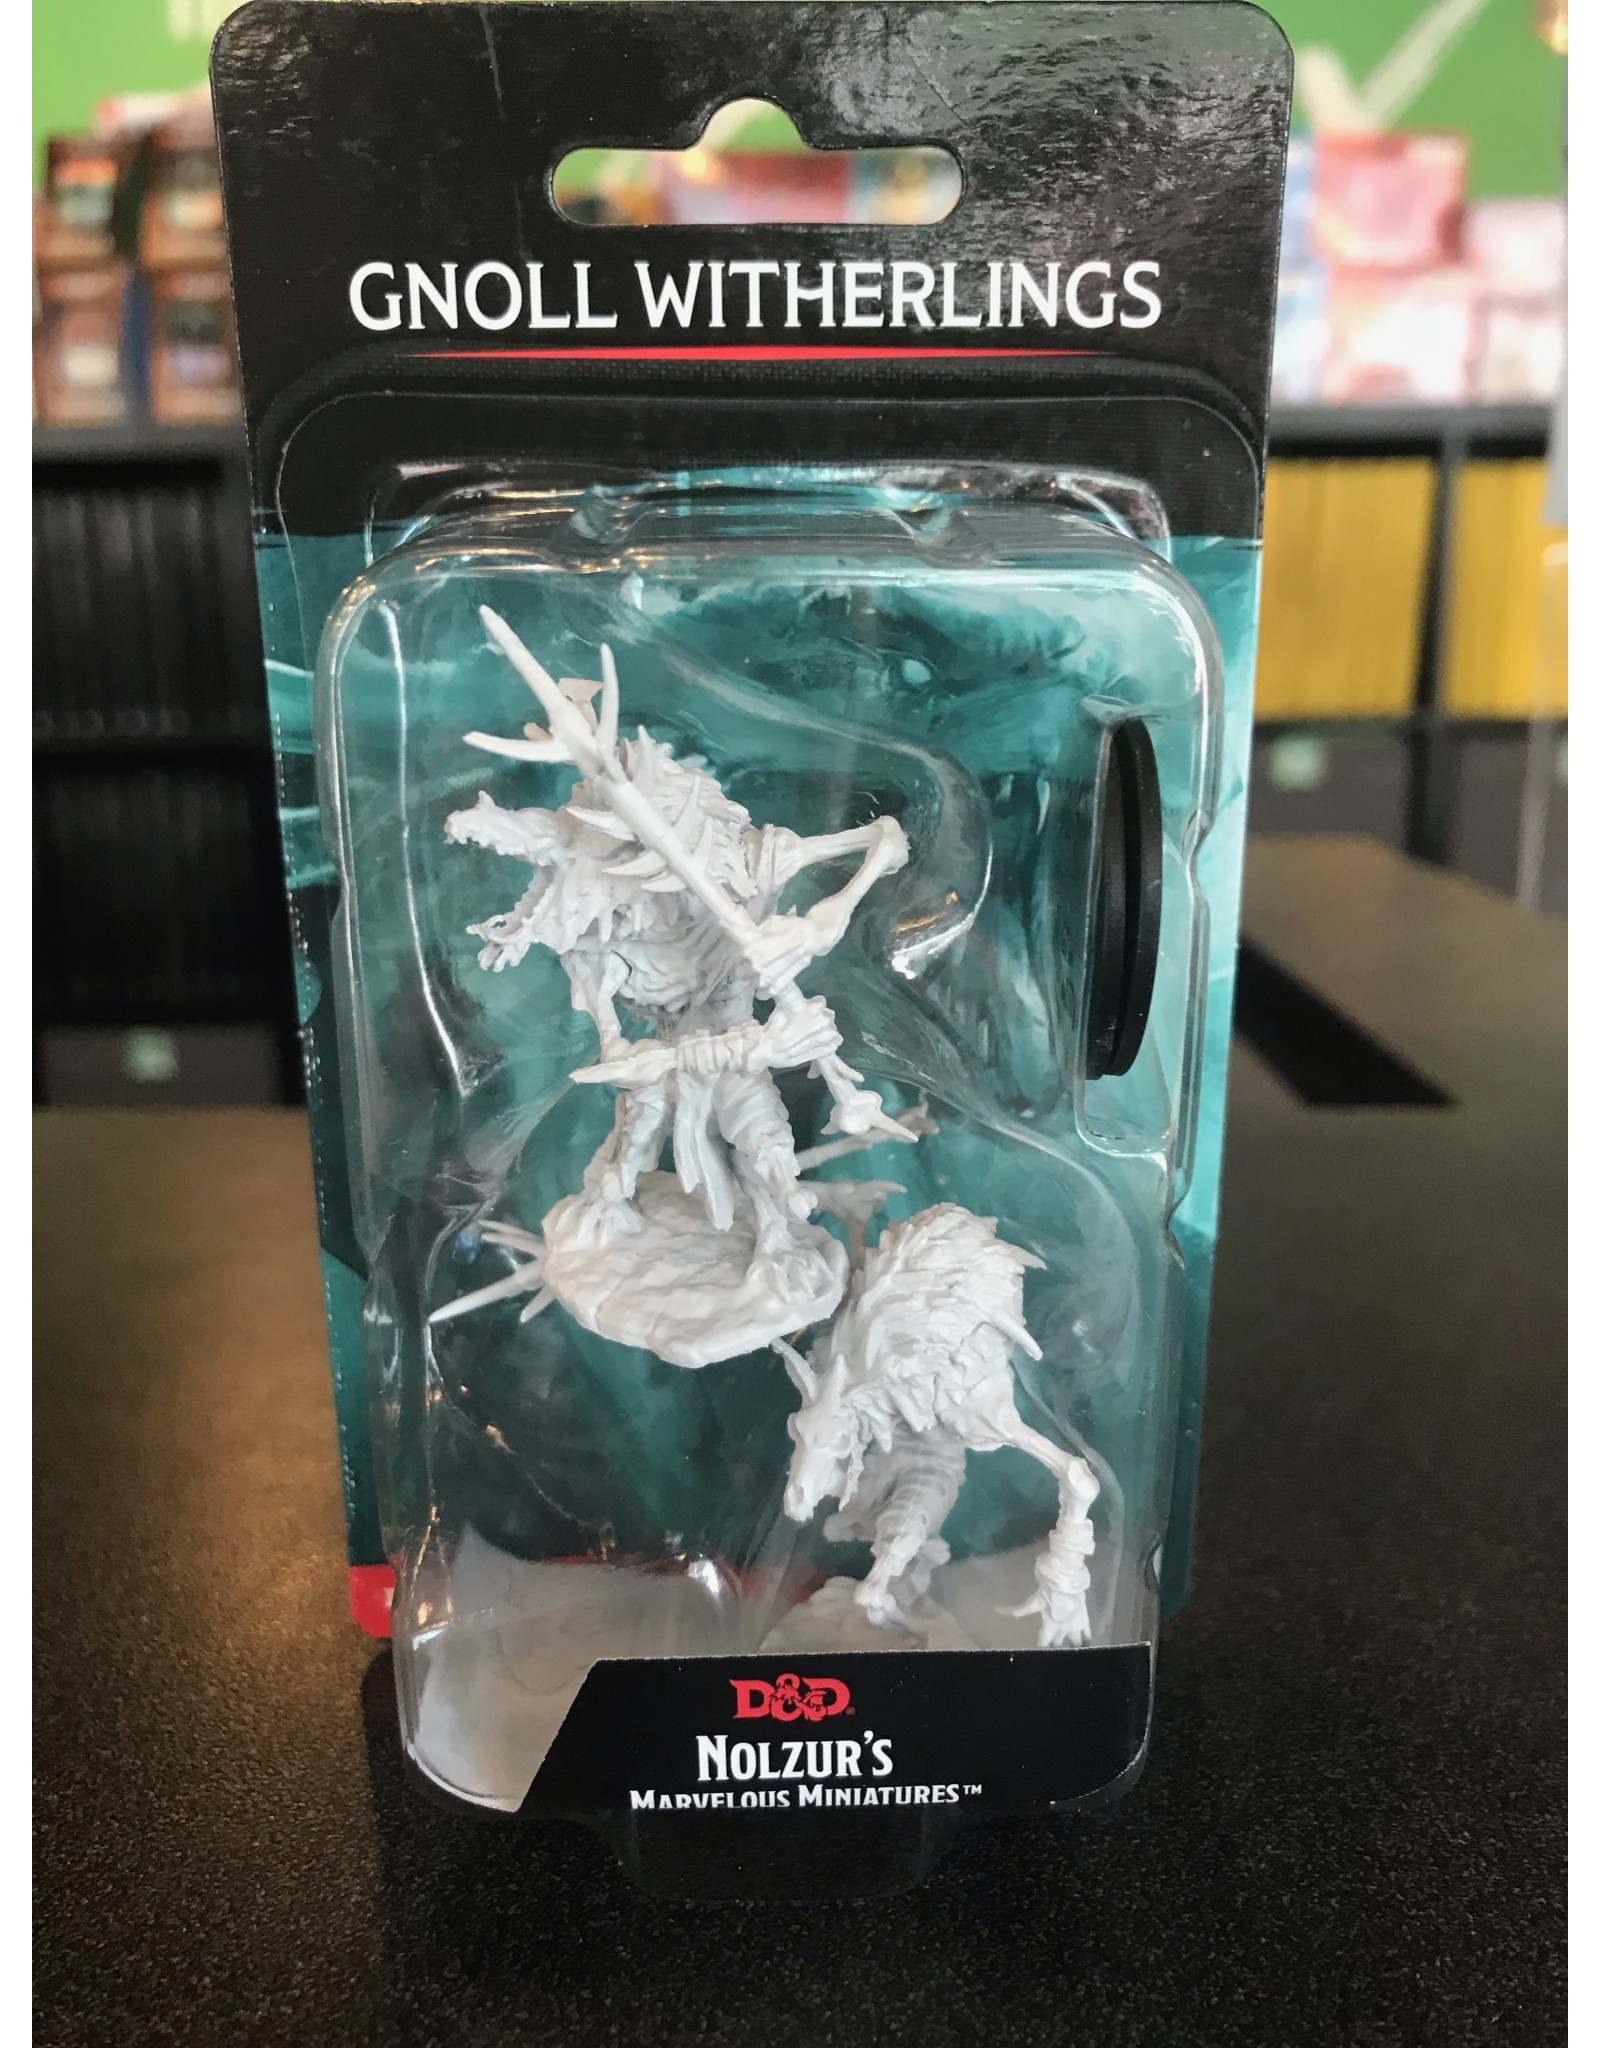 D & D Minis DND UNPAINTED MINIS WV15 GNOLL WITHERLINGS (144)